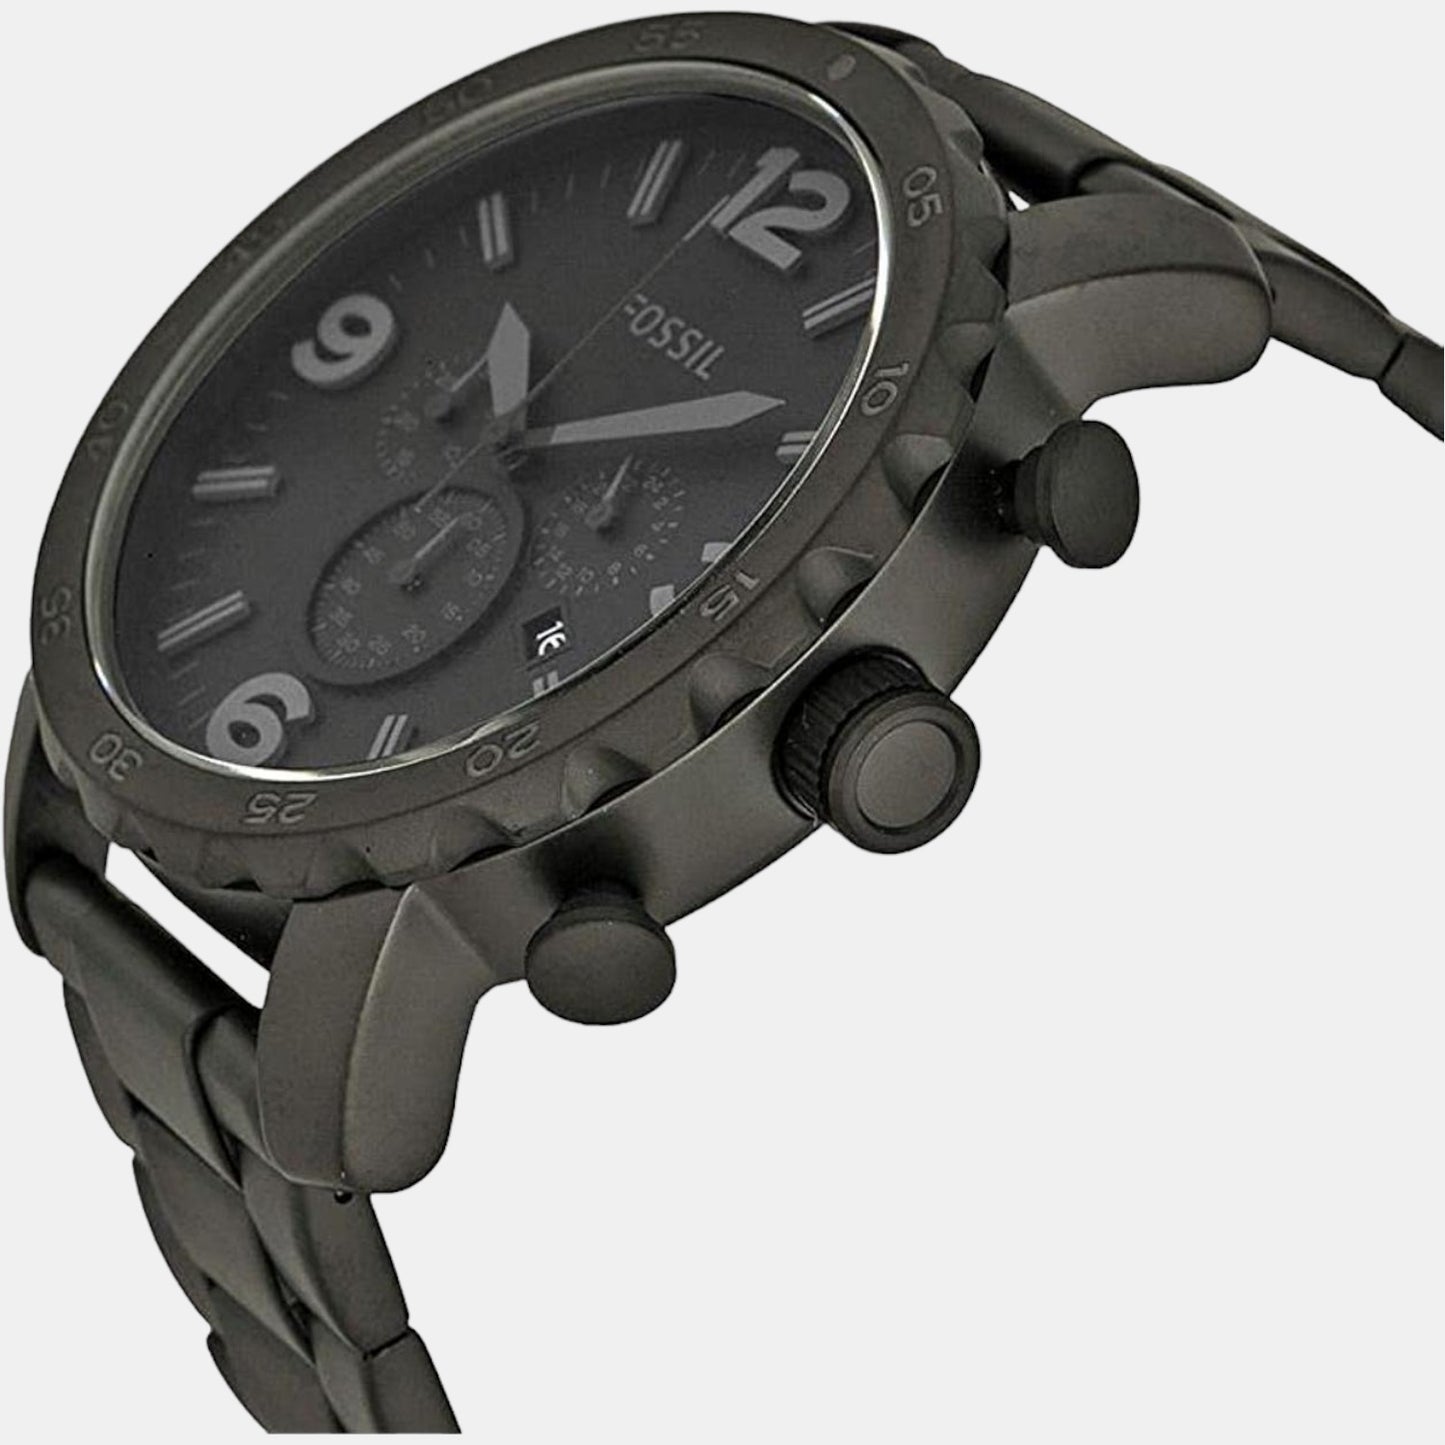 Male Black Stainless Steel Chronograph Watch JR1401